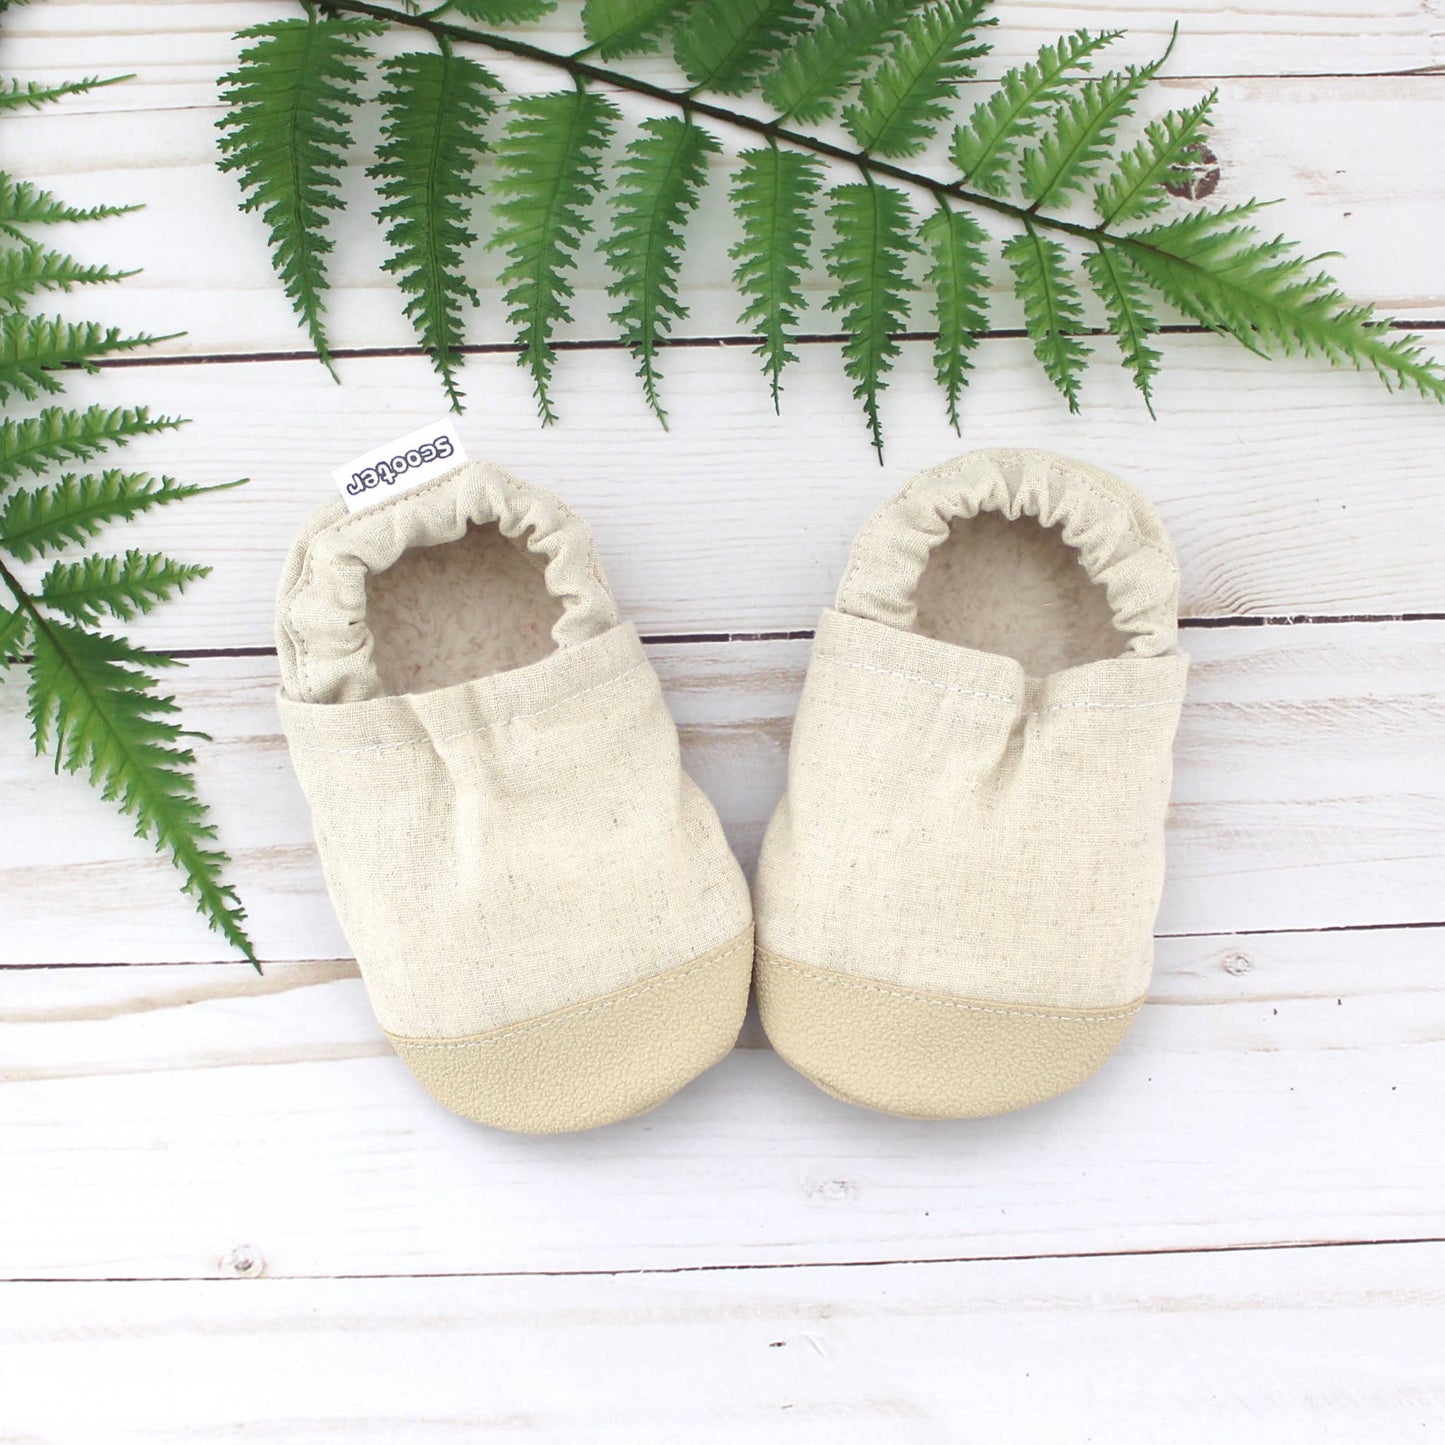 Scooter Booties - Tan Linen Baby Shoes: 0 - 6 months